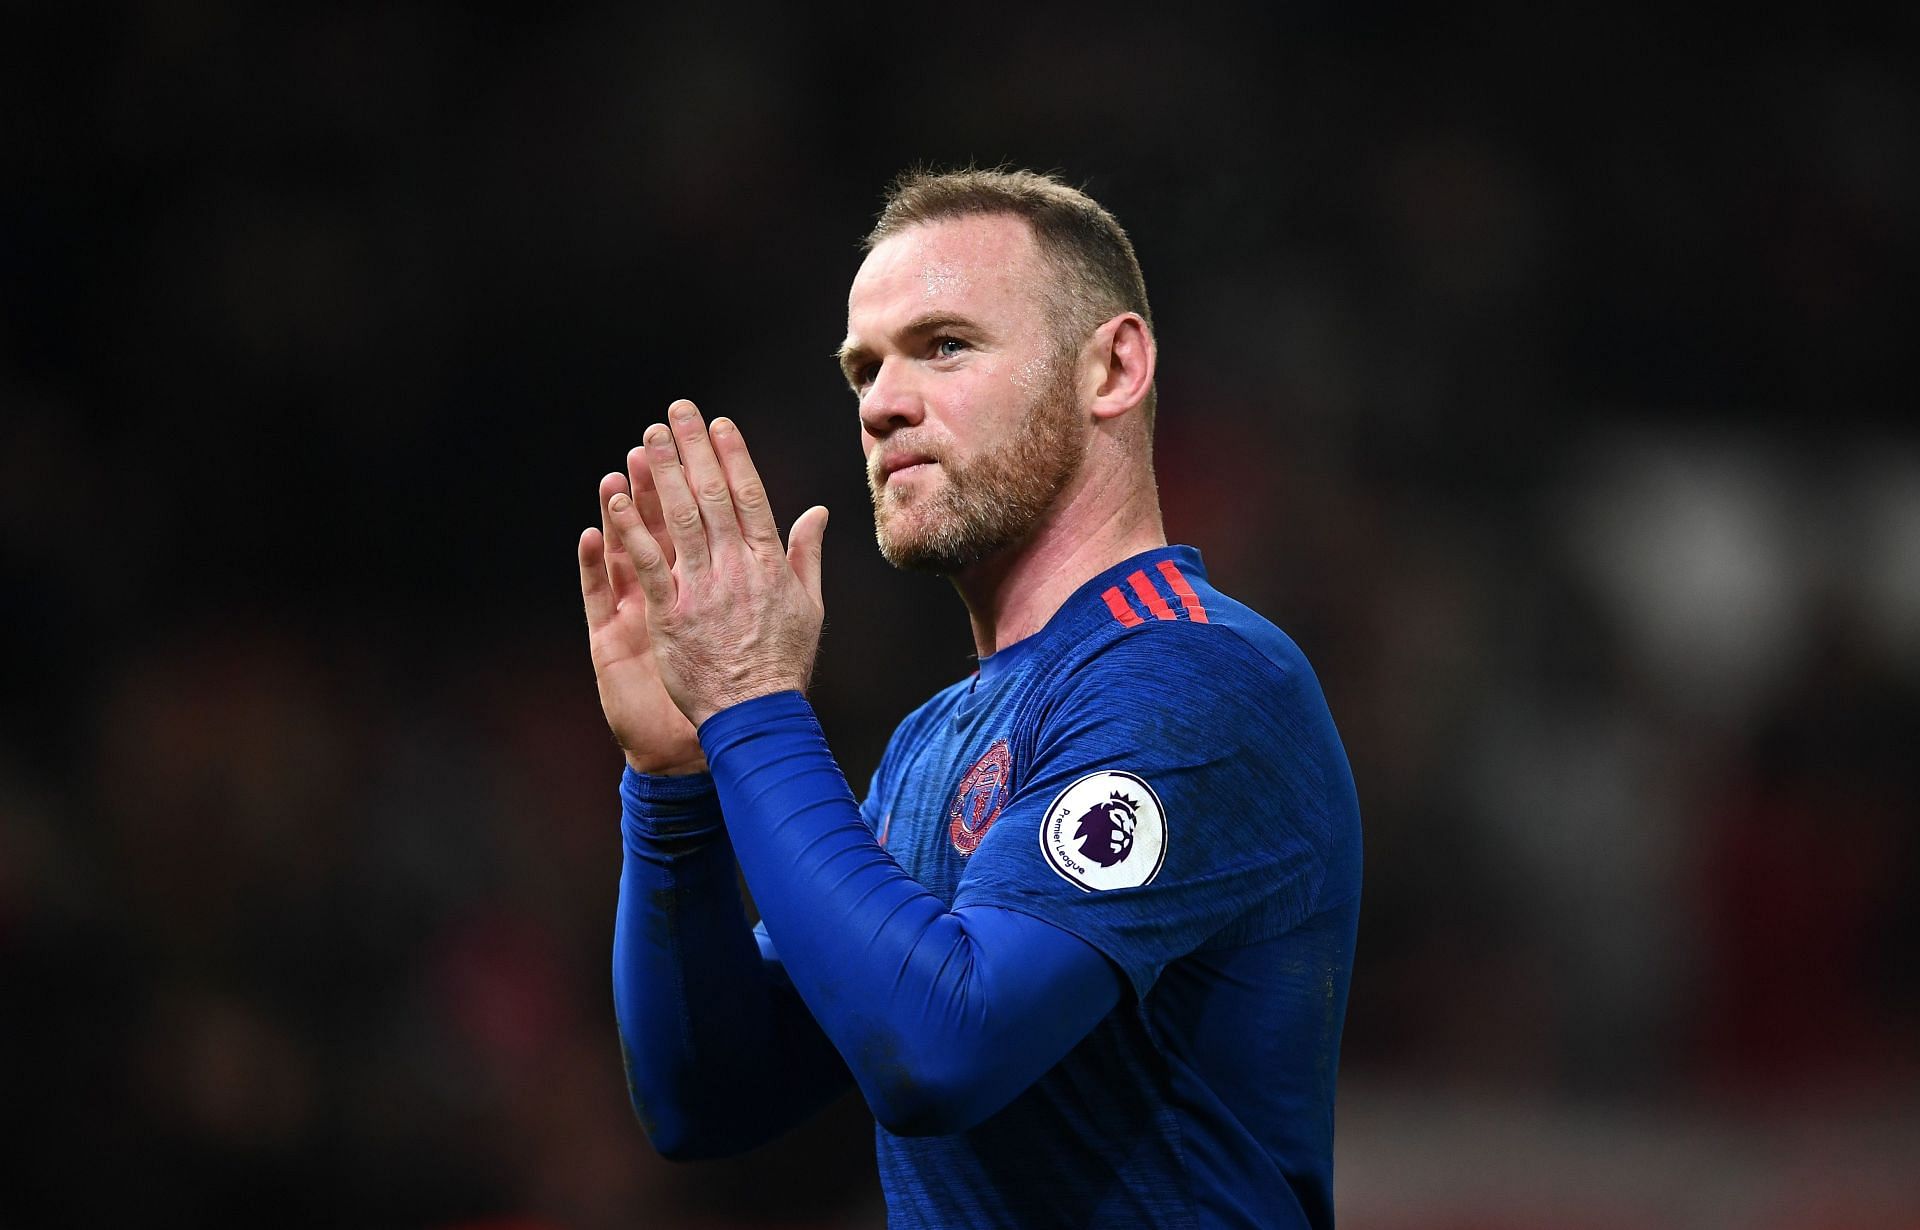 Rooney after scoring his 250th goal against Stoke City